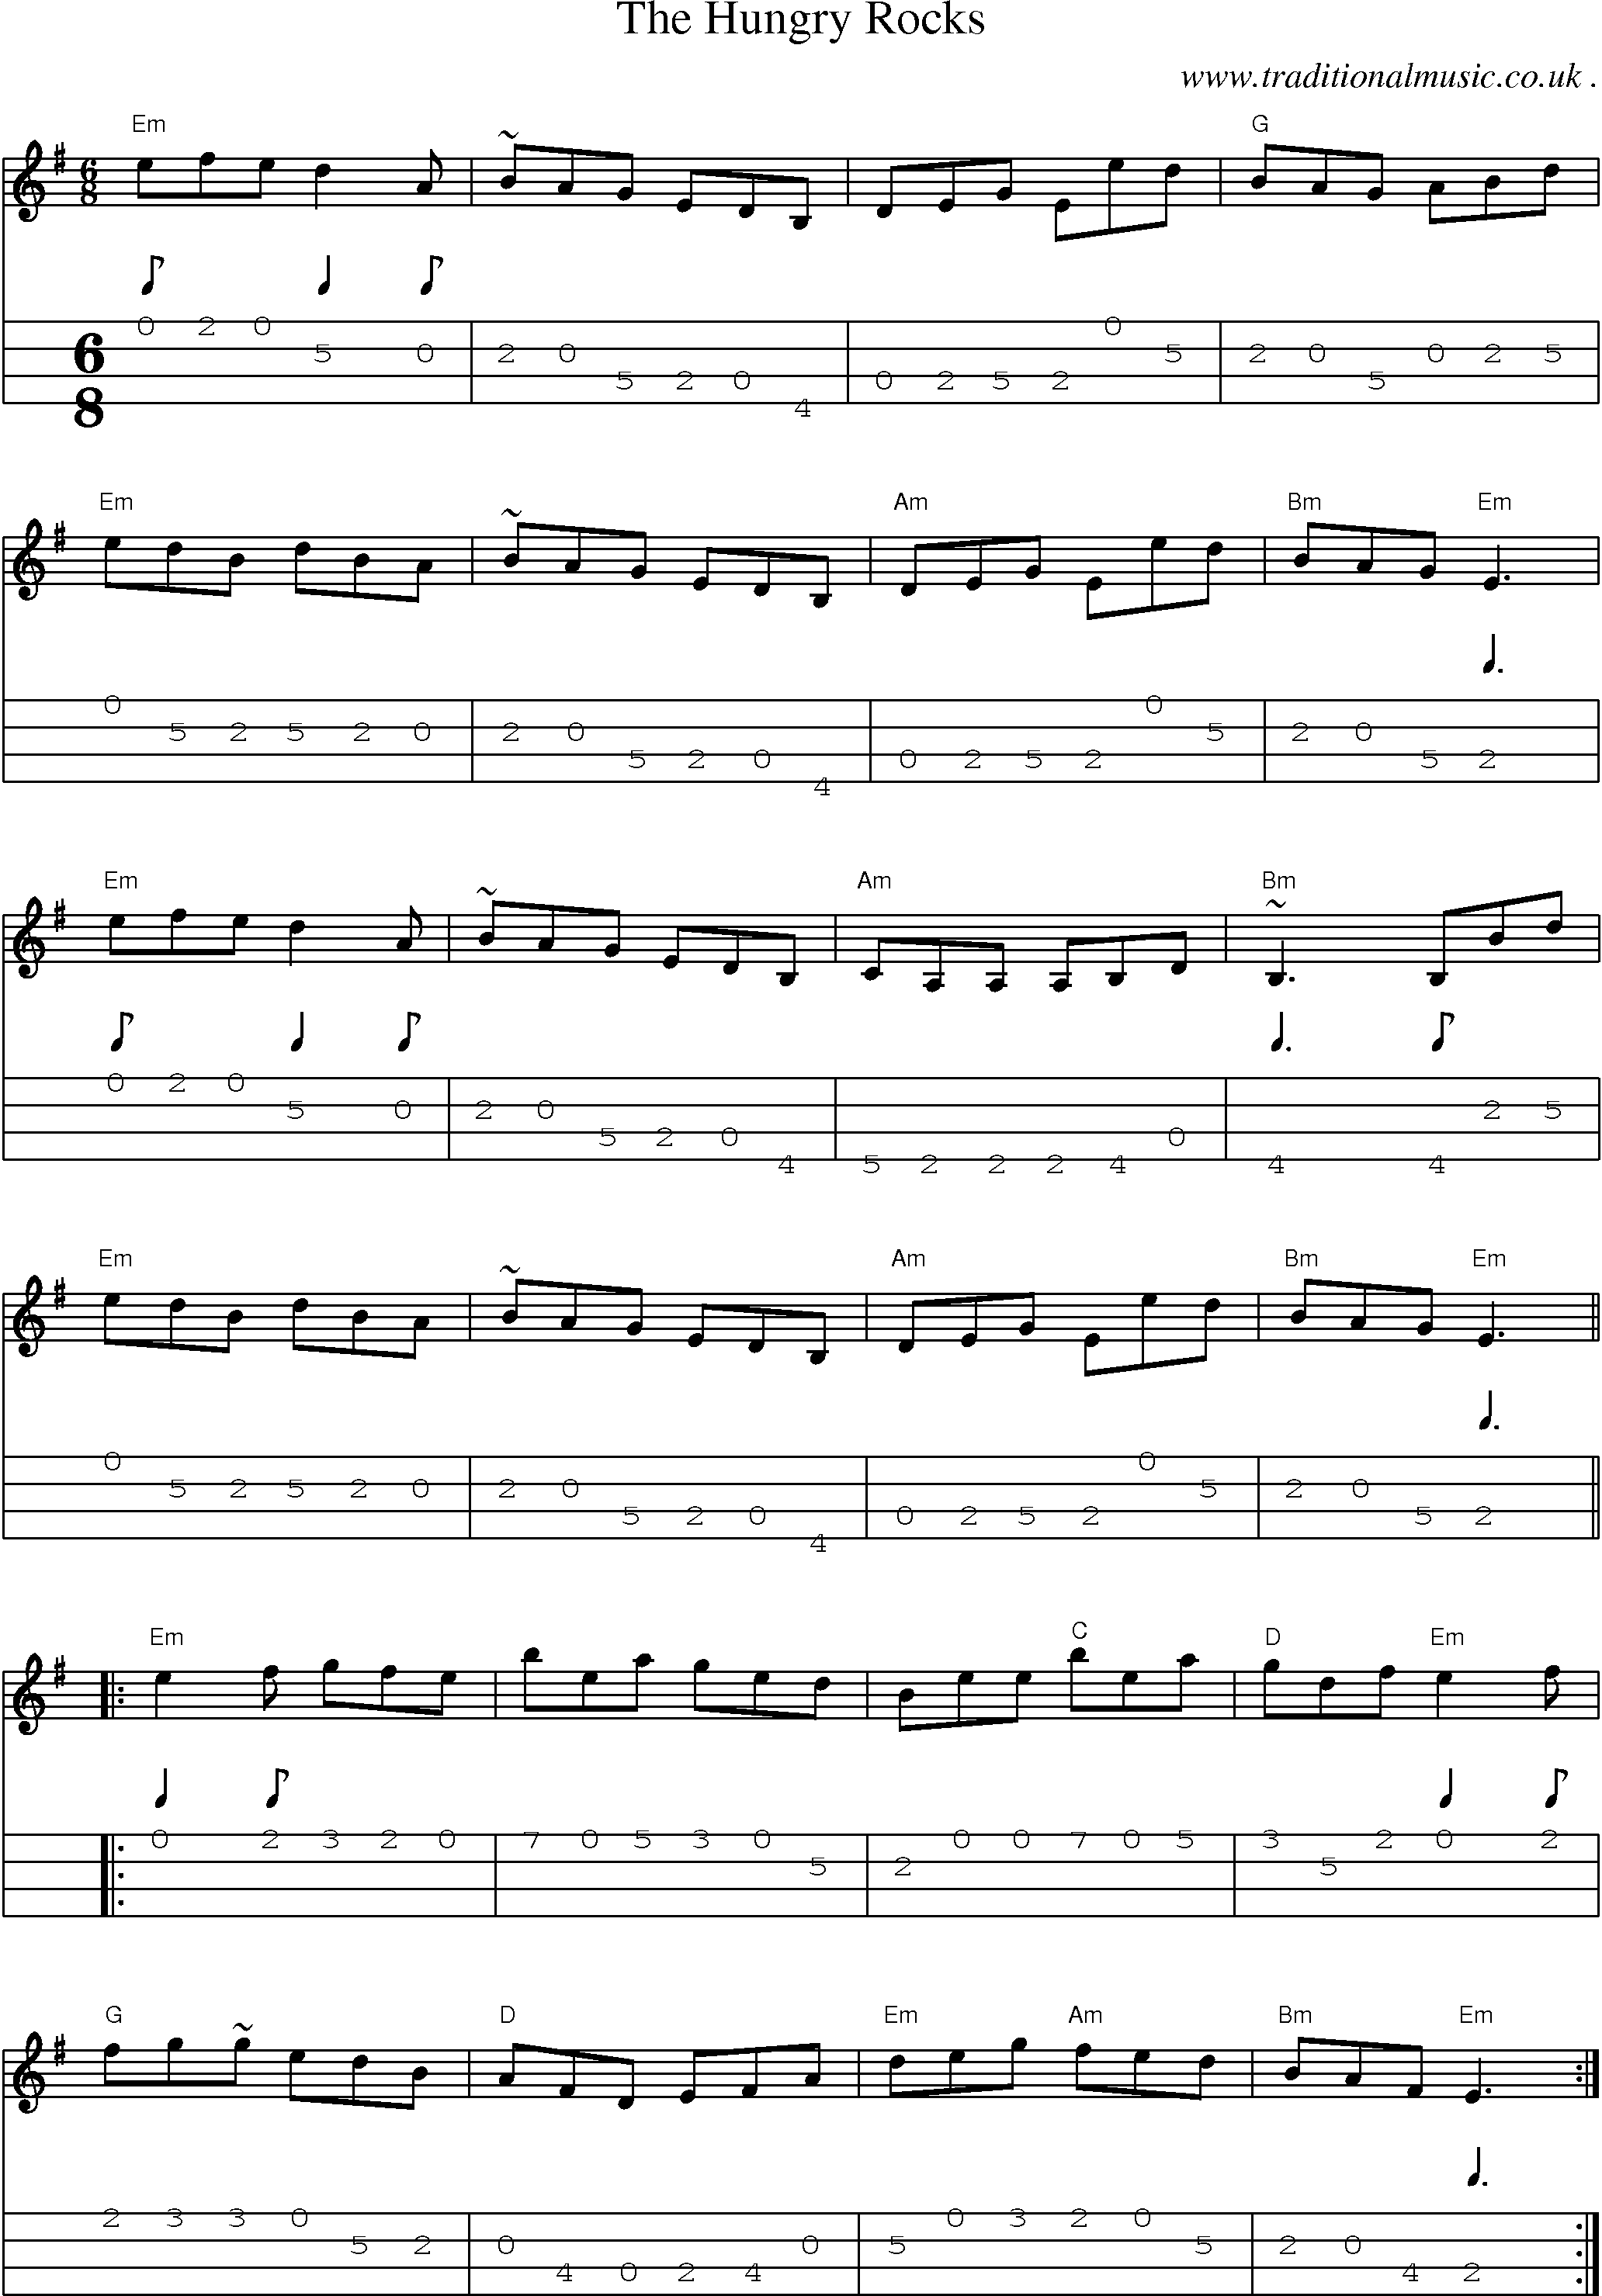 Music Score and Guitar Tabs for The Hungry Rocks